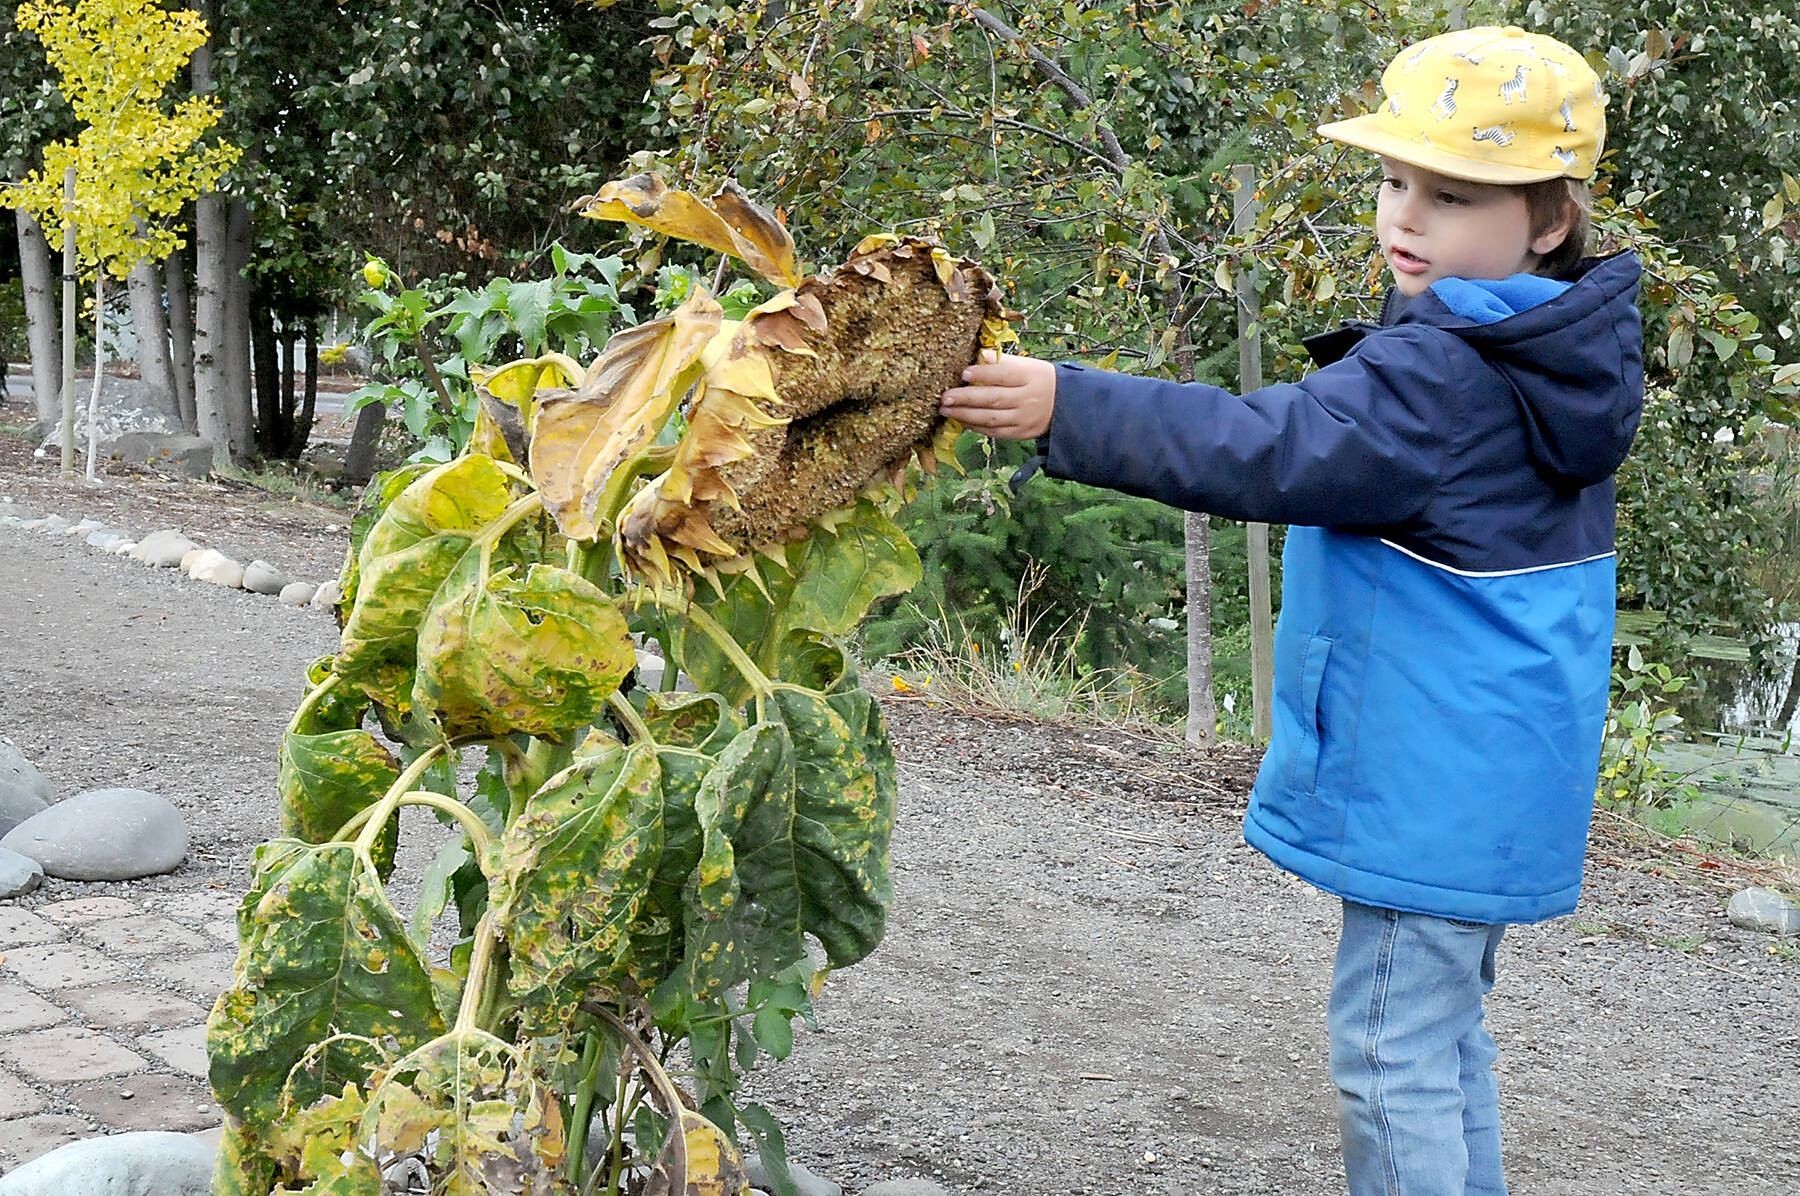 Leo Wright, 3, of Port Townsend examines an end-of-season sunflower at the Sequim Botanical Garden near the Albert Haller Playfields at the Water Reuse Demonstration Site on Wednesday. The garden features a variety of flowers and plants maintained the city and by local gardening groups. (Keith Thorpe/Peninsula Daily News)